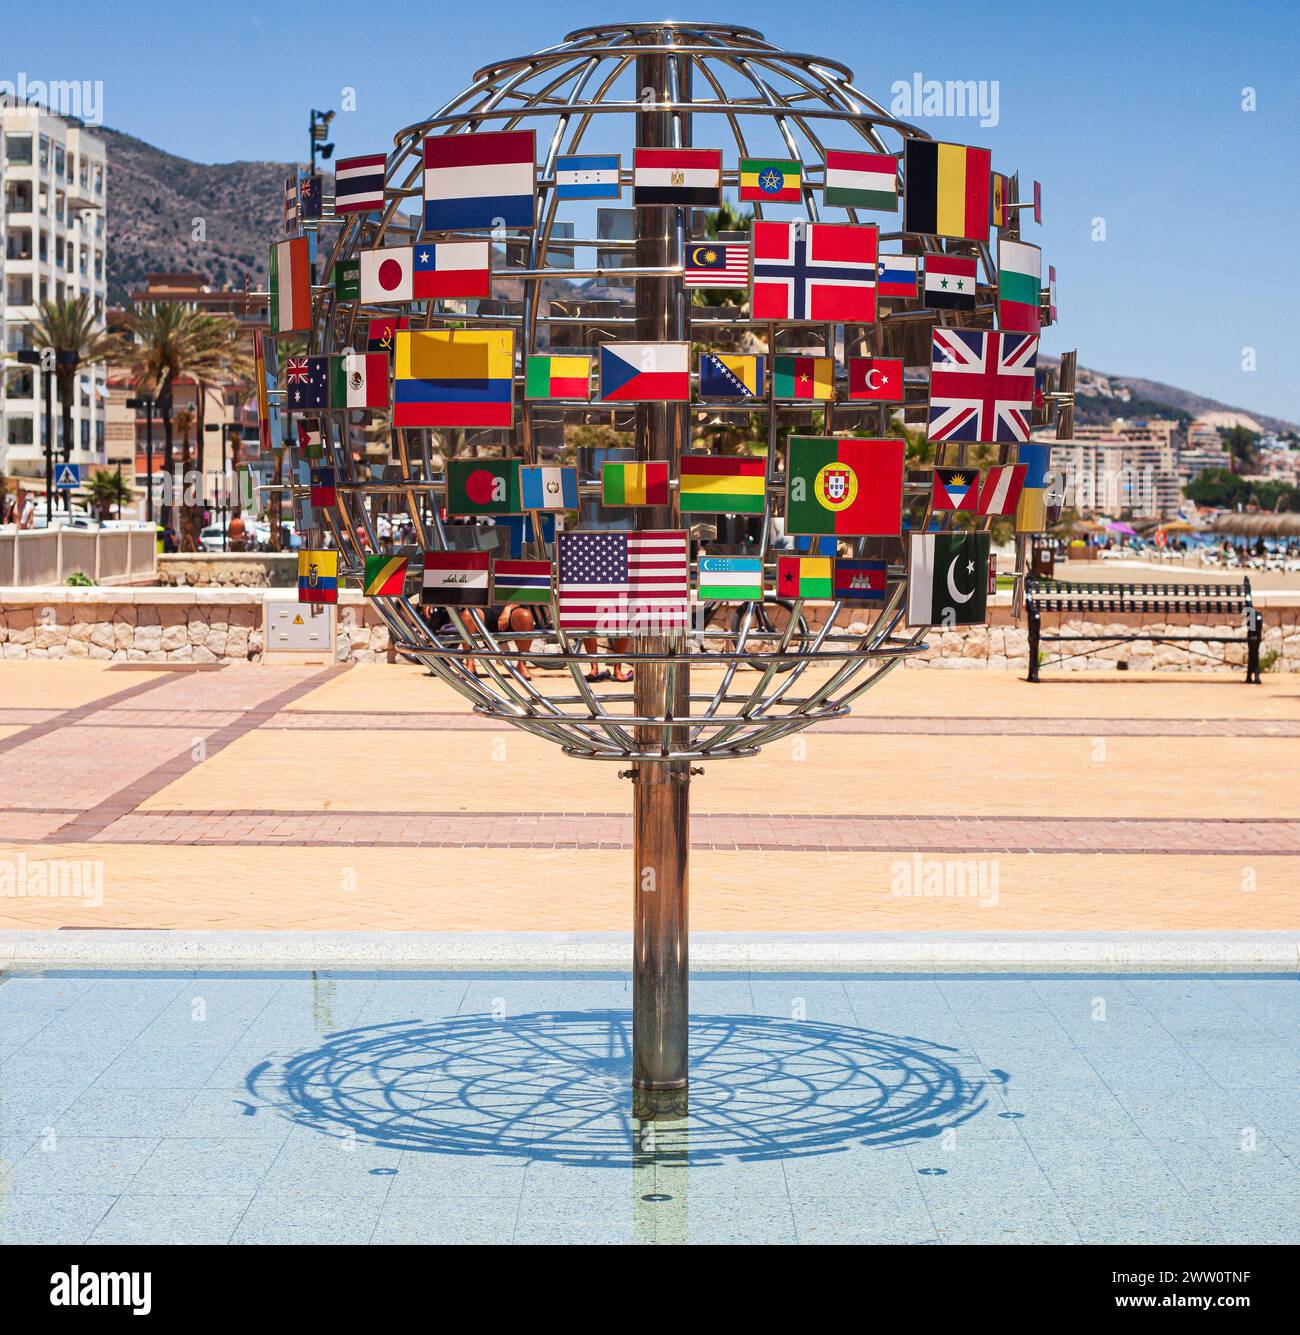 Fountain of the Nations sculpture on Paseo Maritimo, Los Boliches, Fuengirola Stock Photo